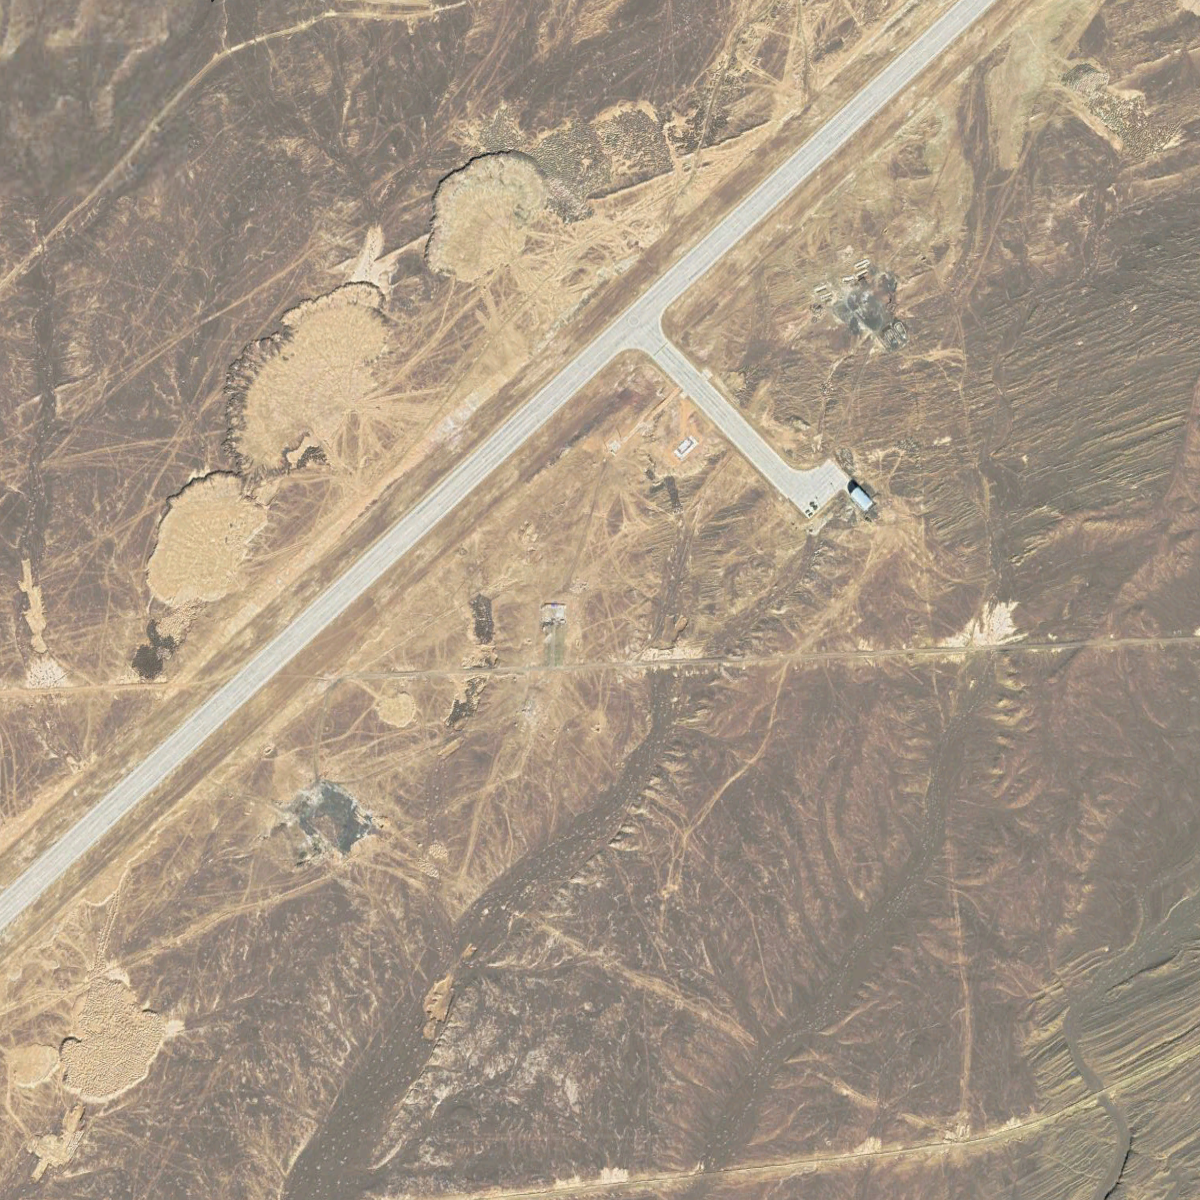 China Is Building an Area 51